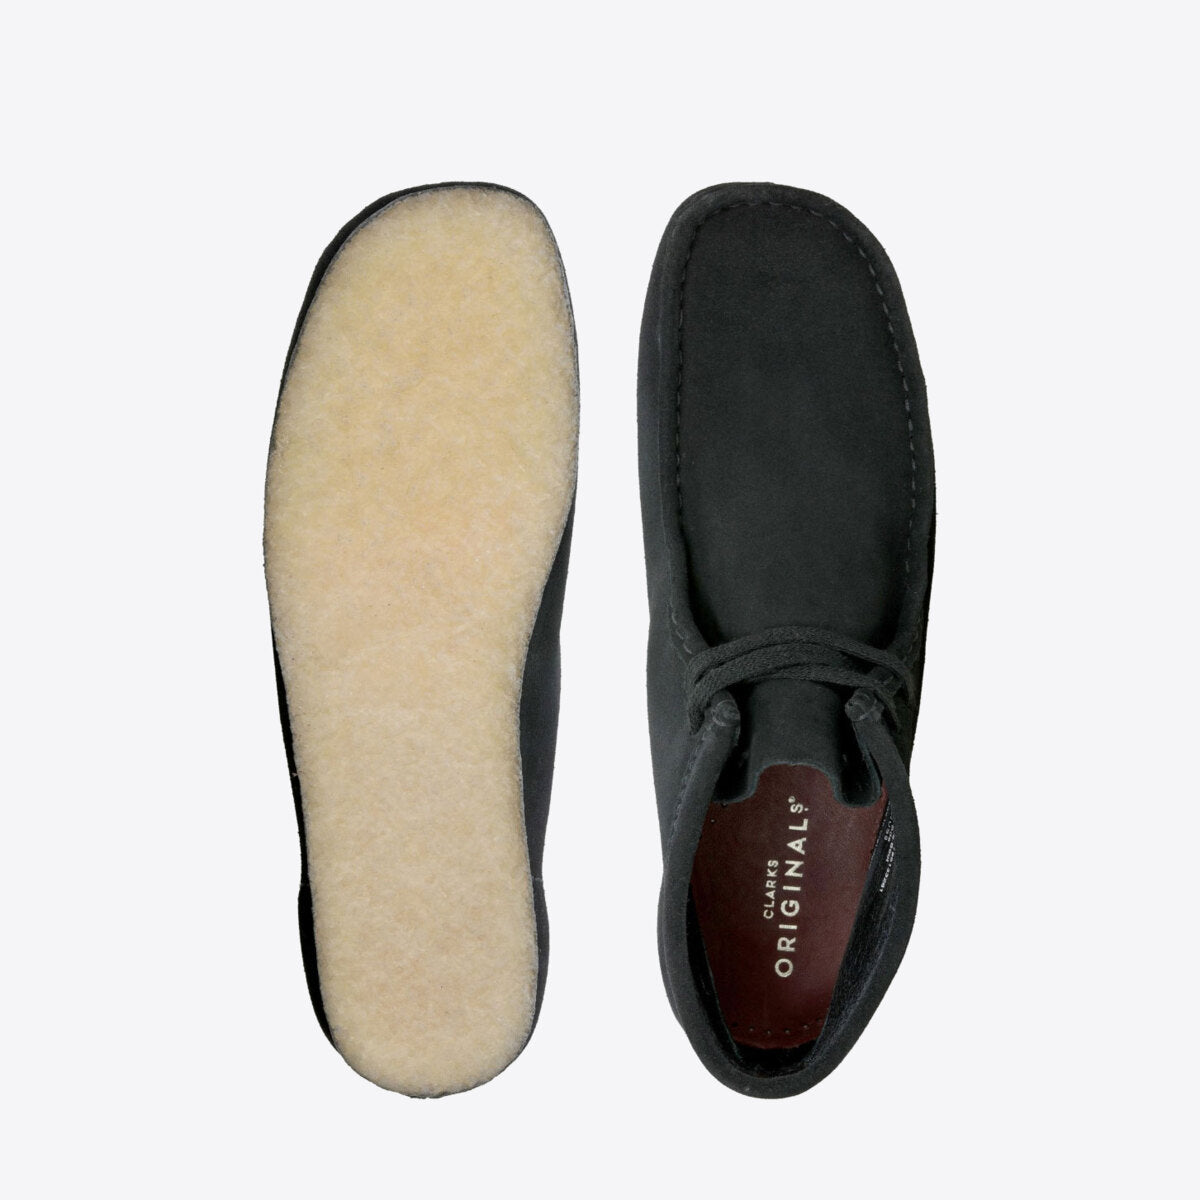 CLARKS Wallabee Boot Suede Black - Image 8